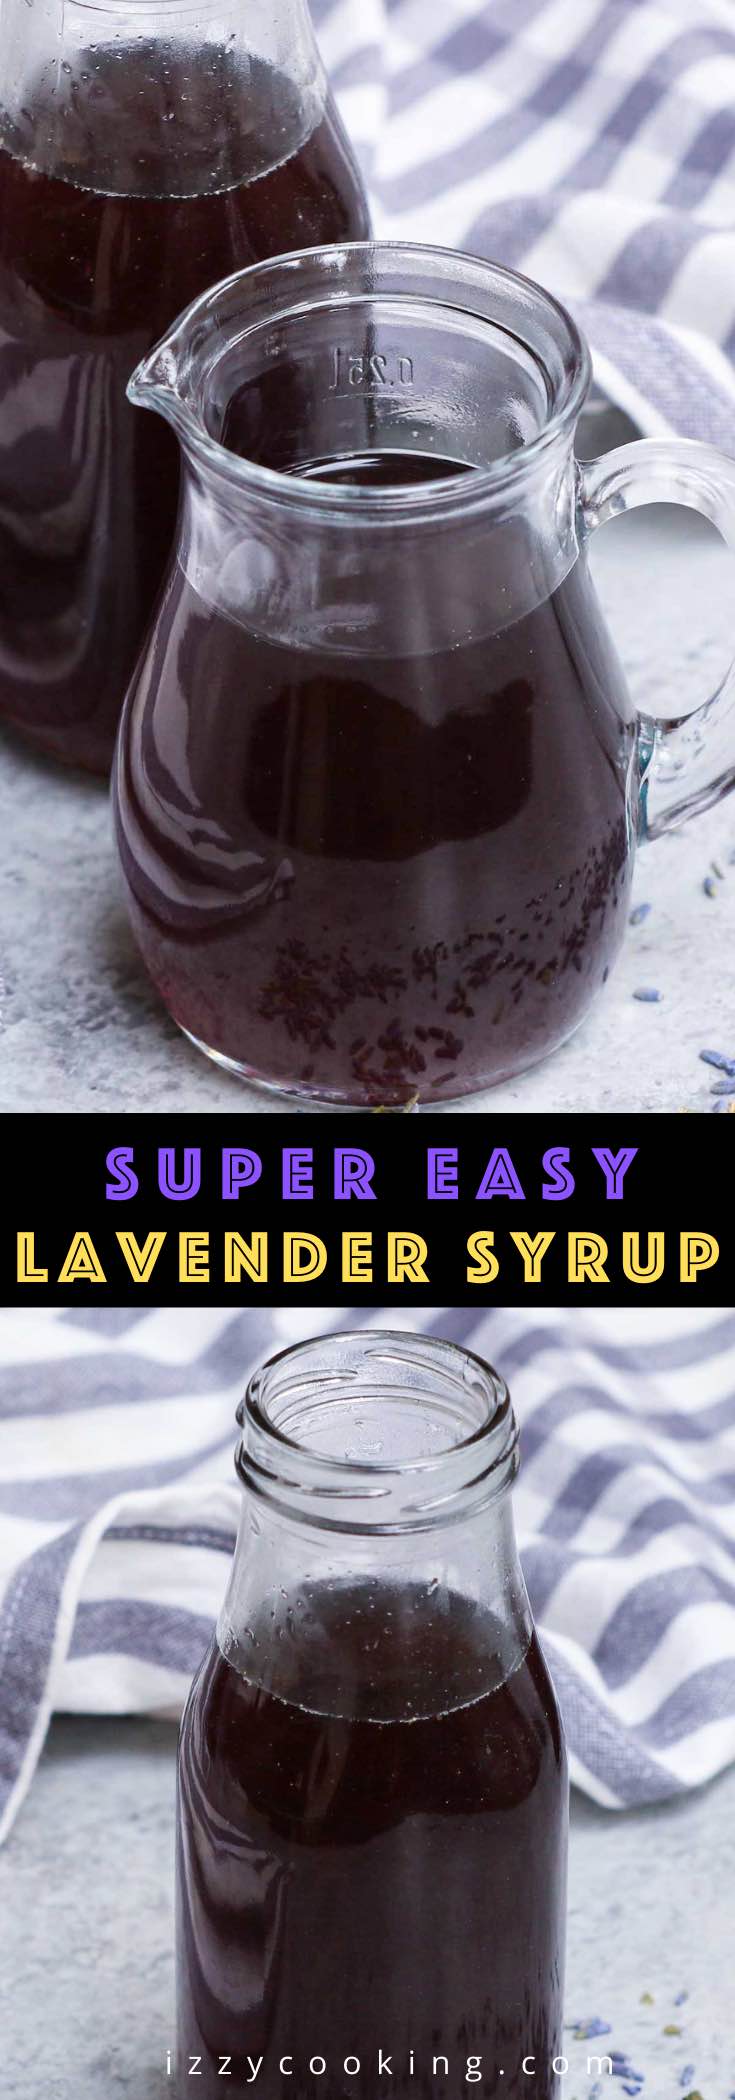 Lavender Simple Syrup is a great way to add sweetness to your drinks while bringing in bright, floral notes. The name itself says how easy this lavender syrup recipe is to make. All you need is lavender, sweetener and water to make an herb-infused syrup that can transform your cocktails, or add elegance to classic beverages like coffee, tea or lemonade.